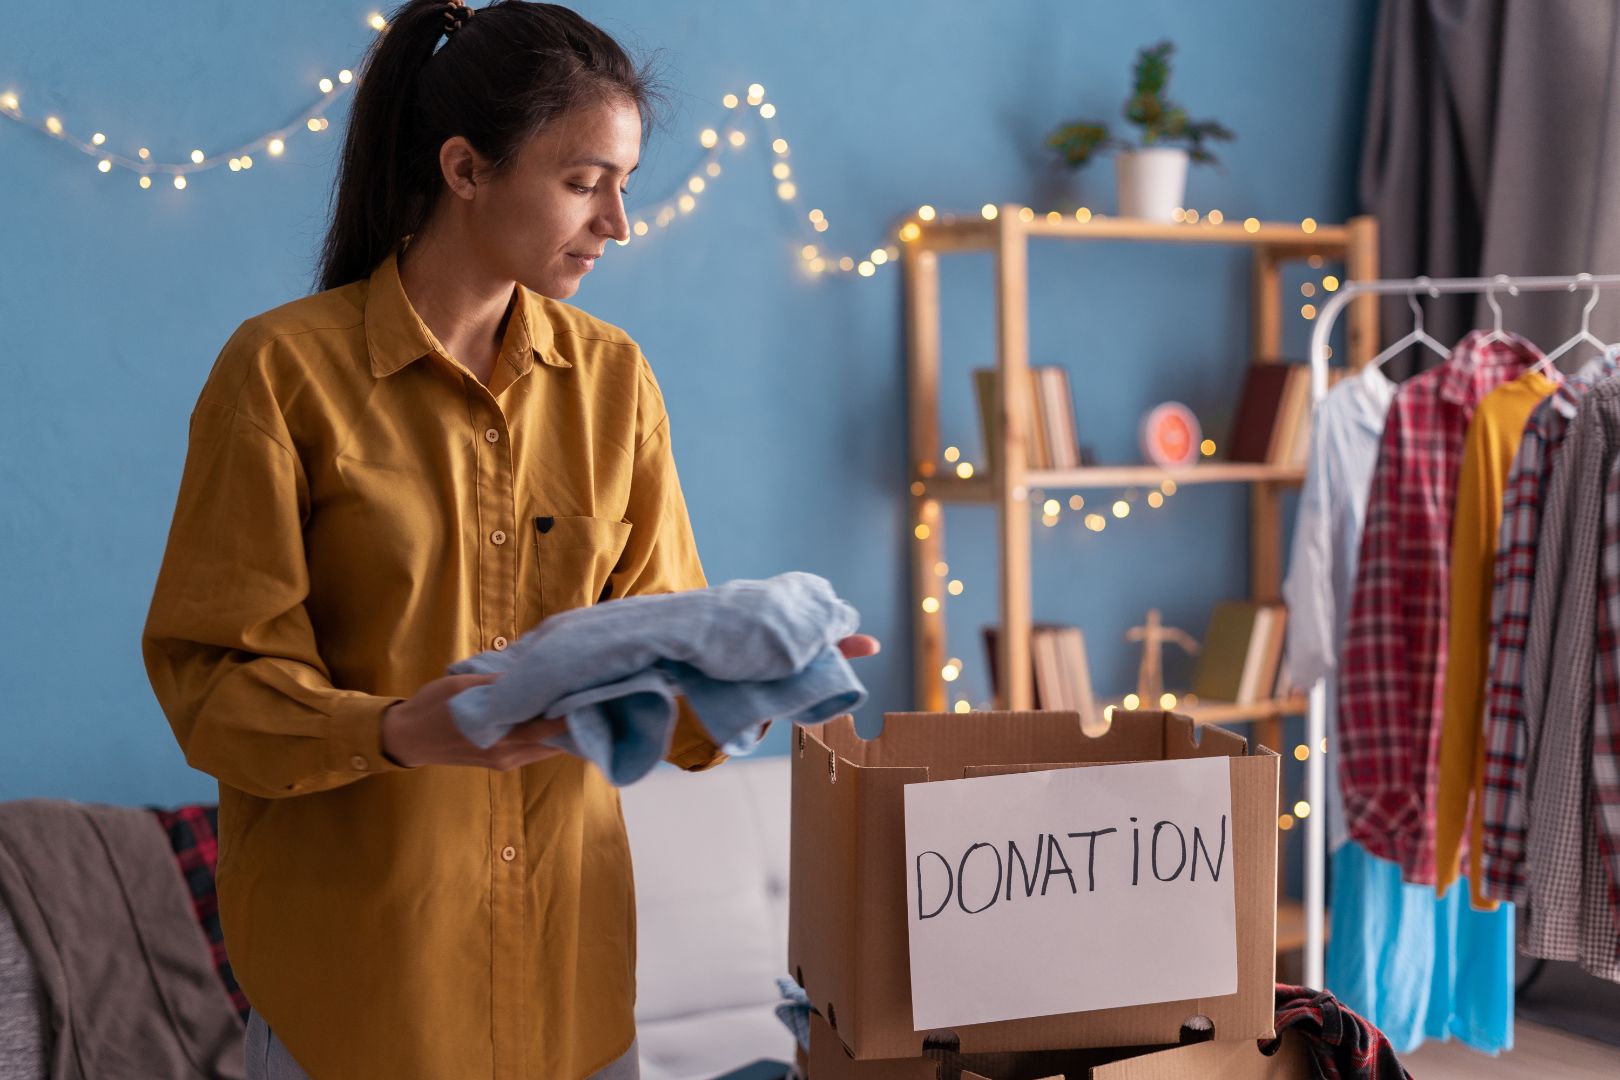 Woman is holding a folded blue shirt and she’s about to place it in a donation box. There is a rack of clothes near her.